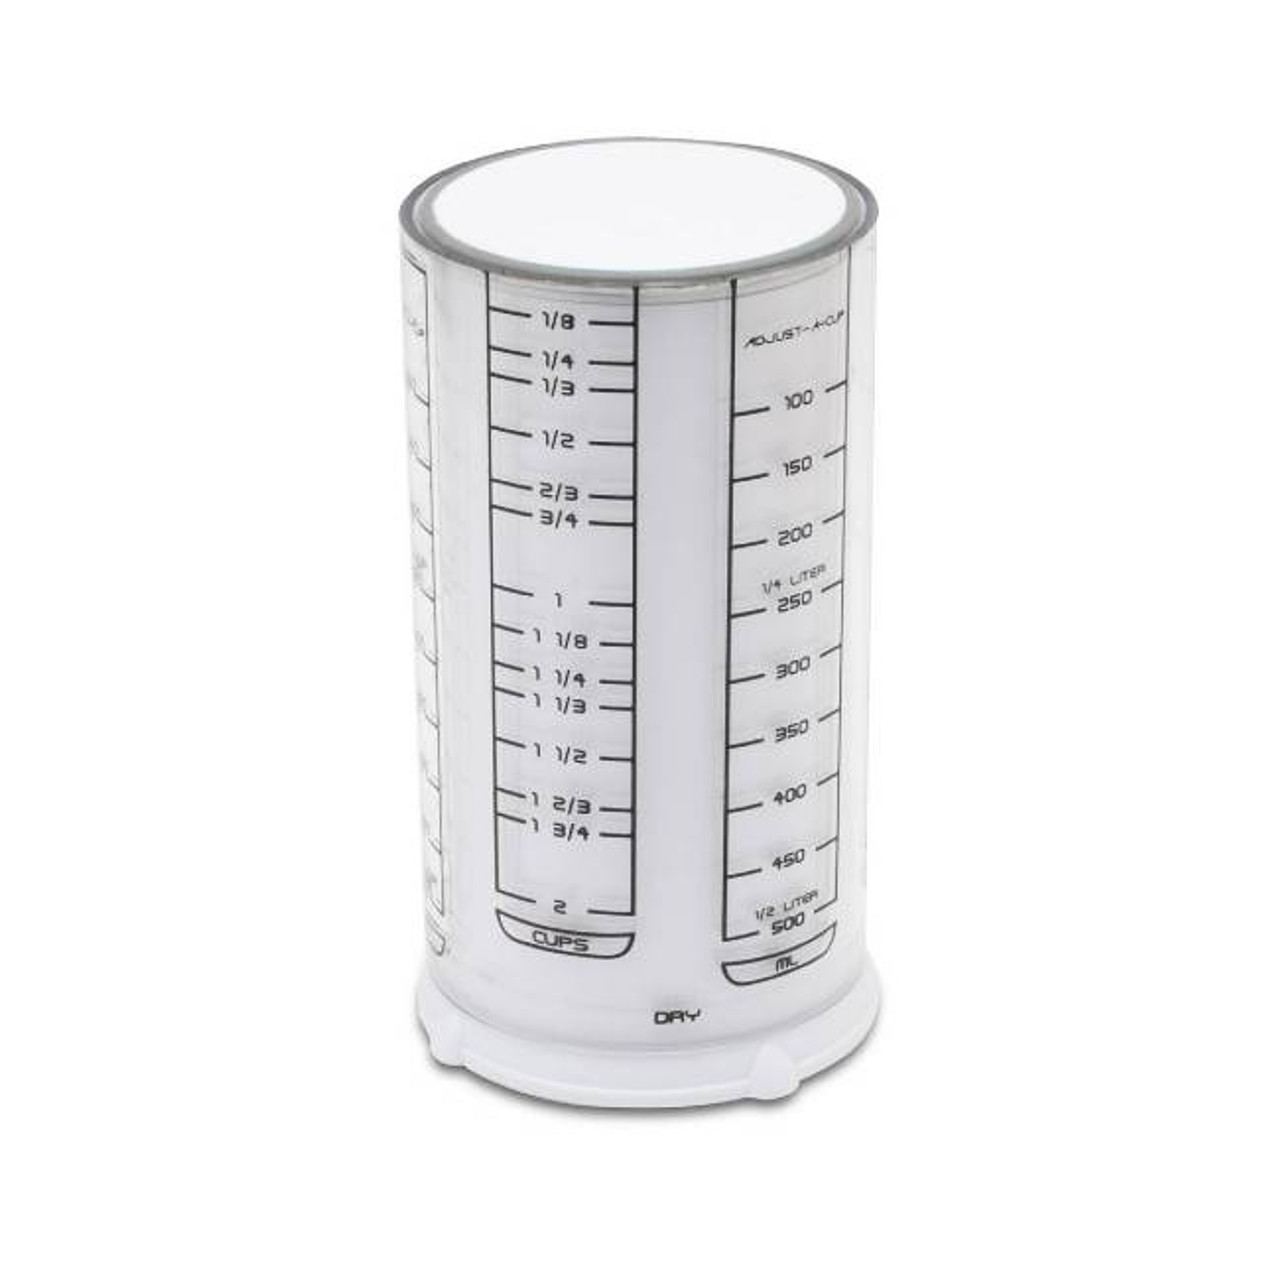 KitchenArt 2 Cup Adjust-A-Cup Measuring Cup, White